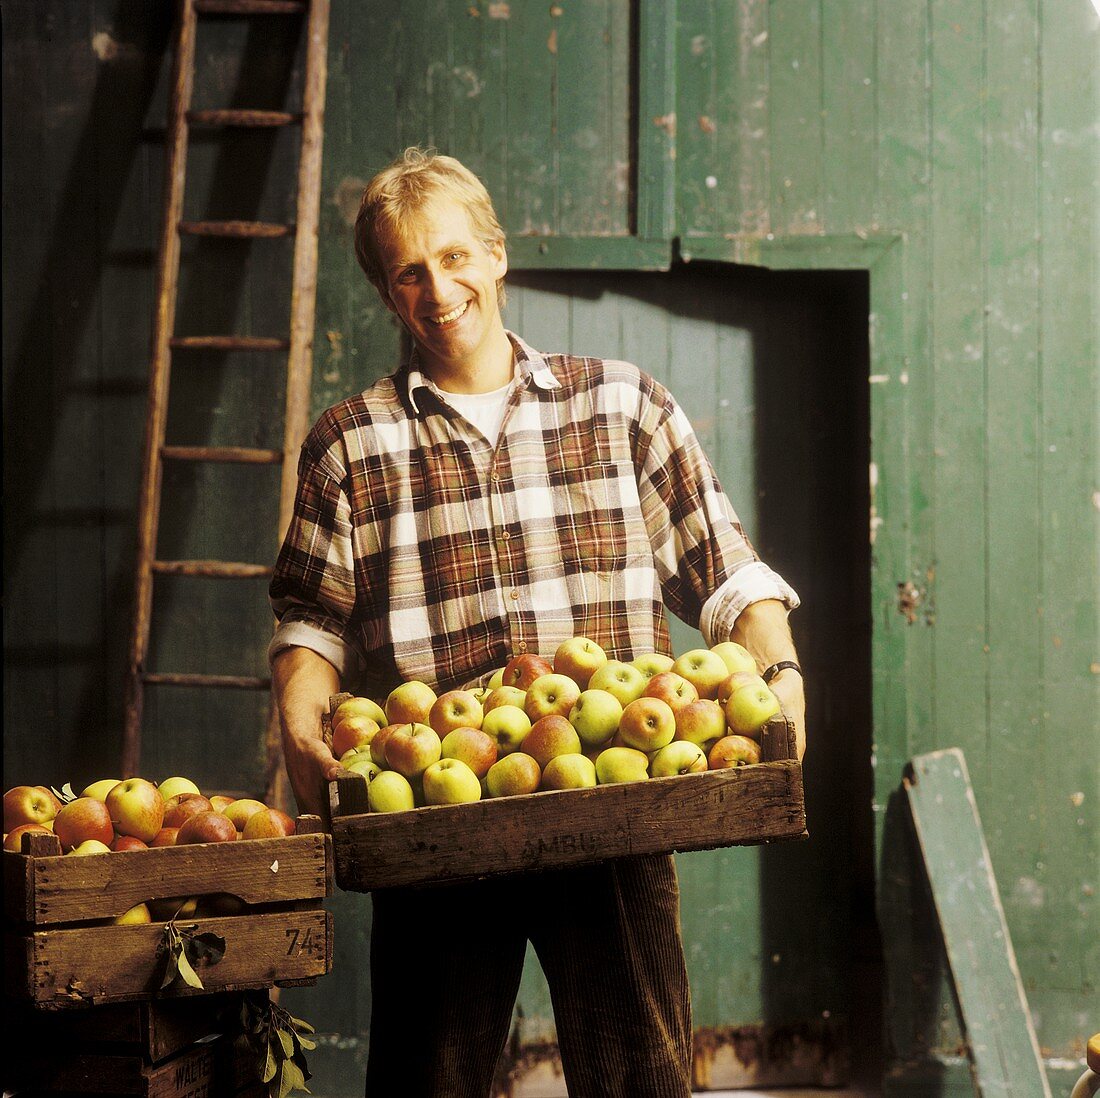 Man holding a crate of apples